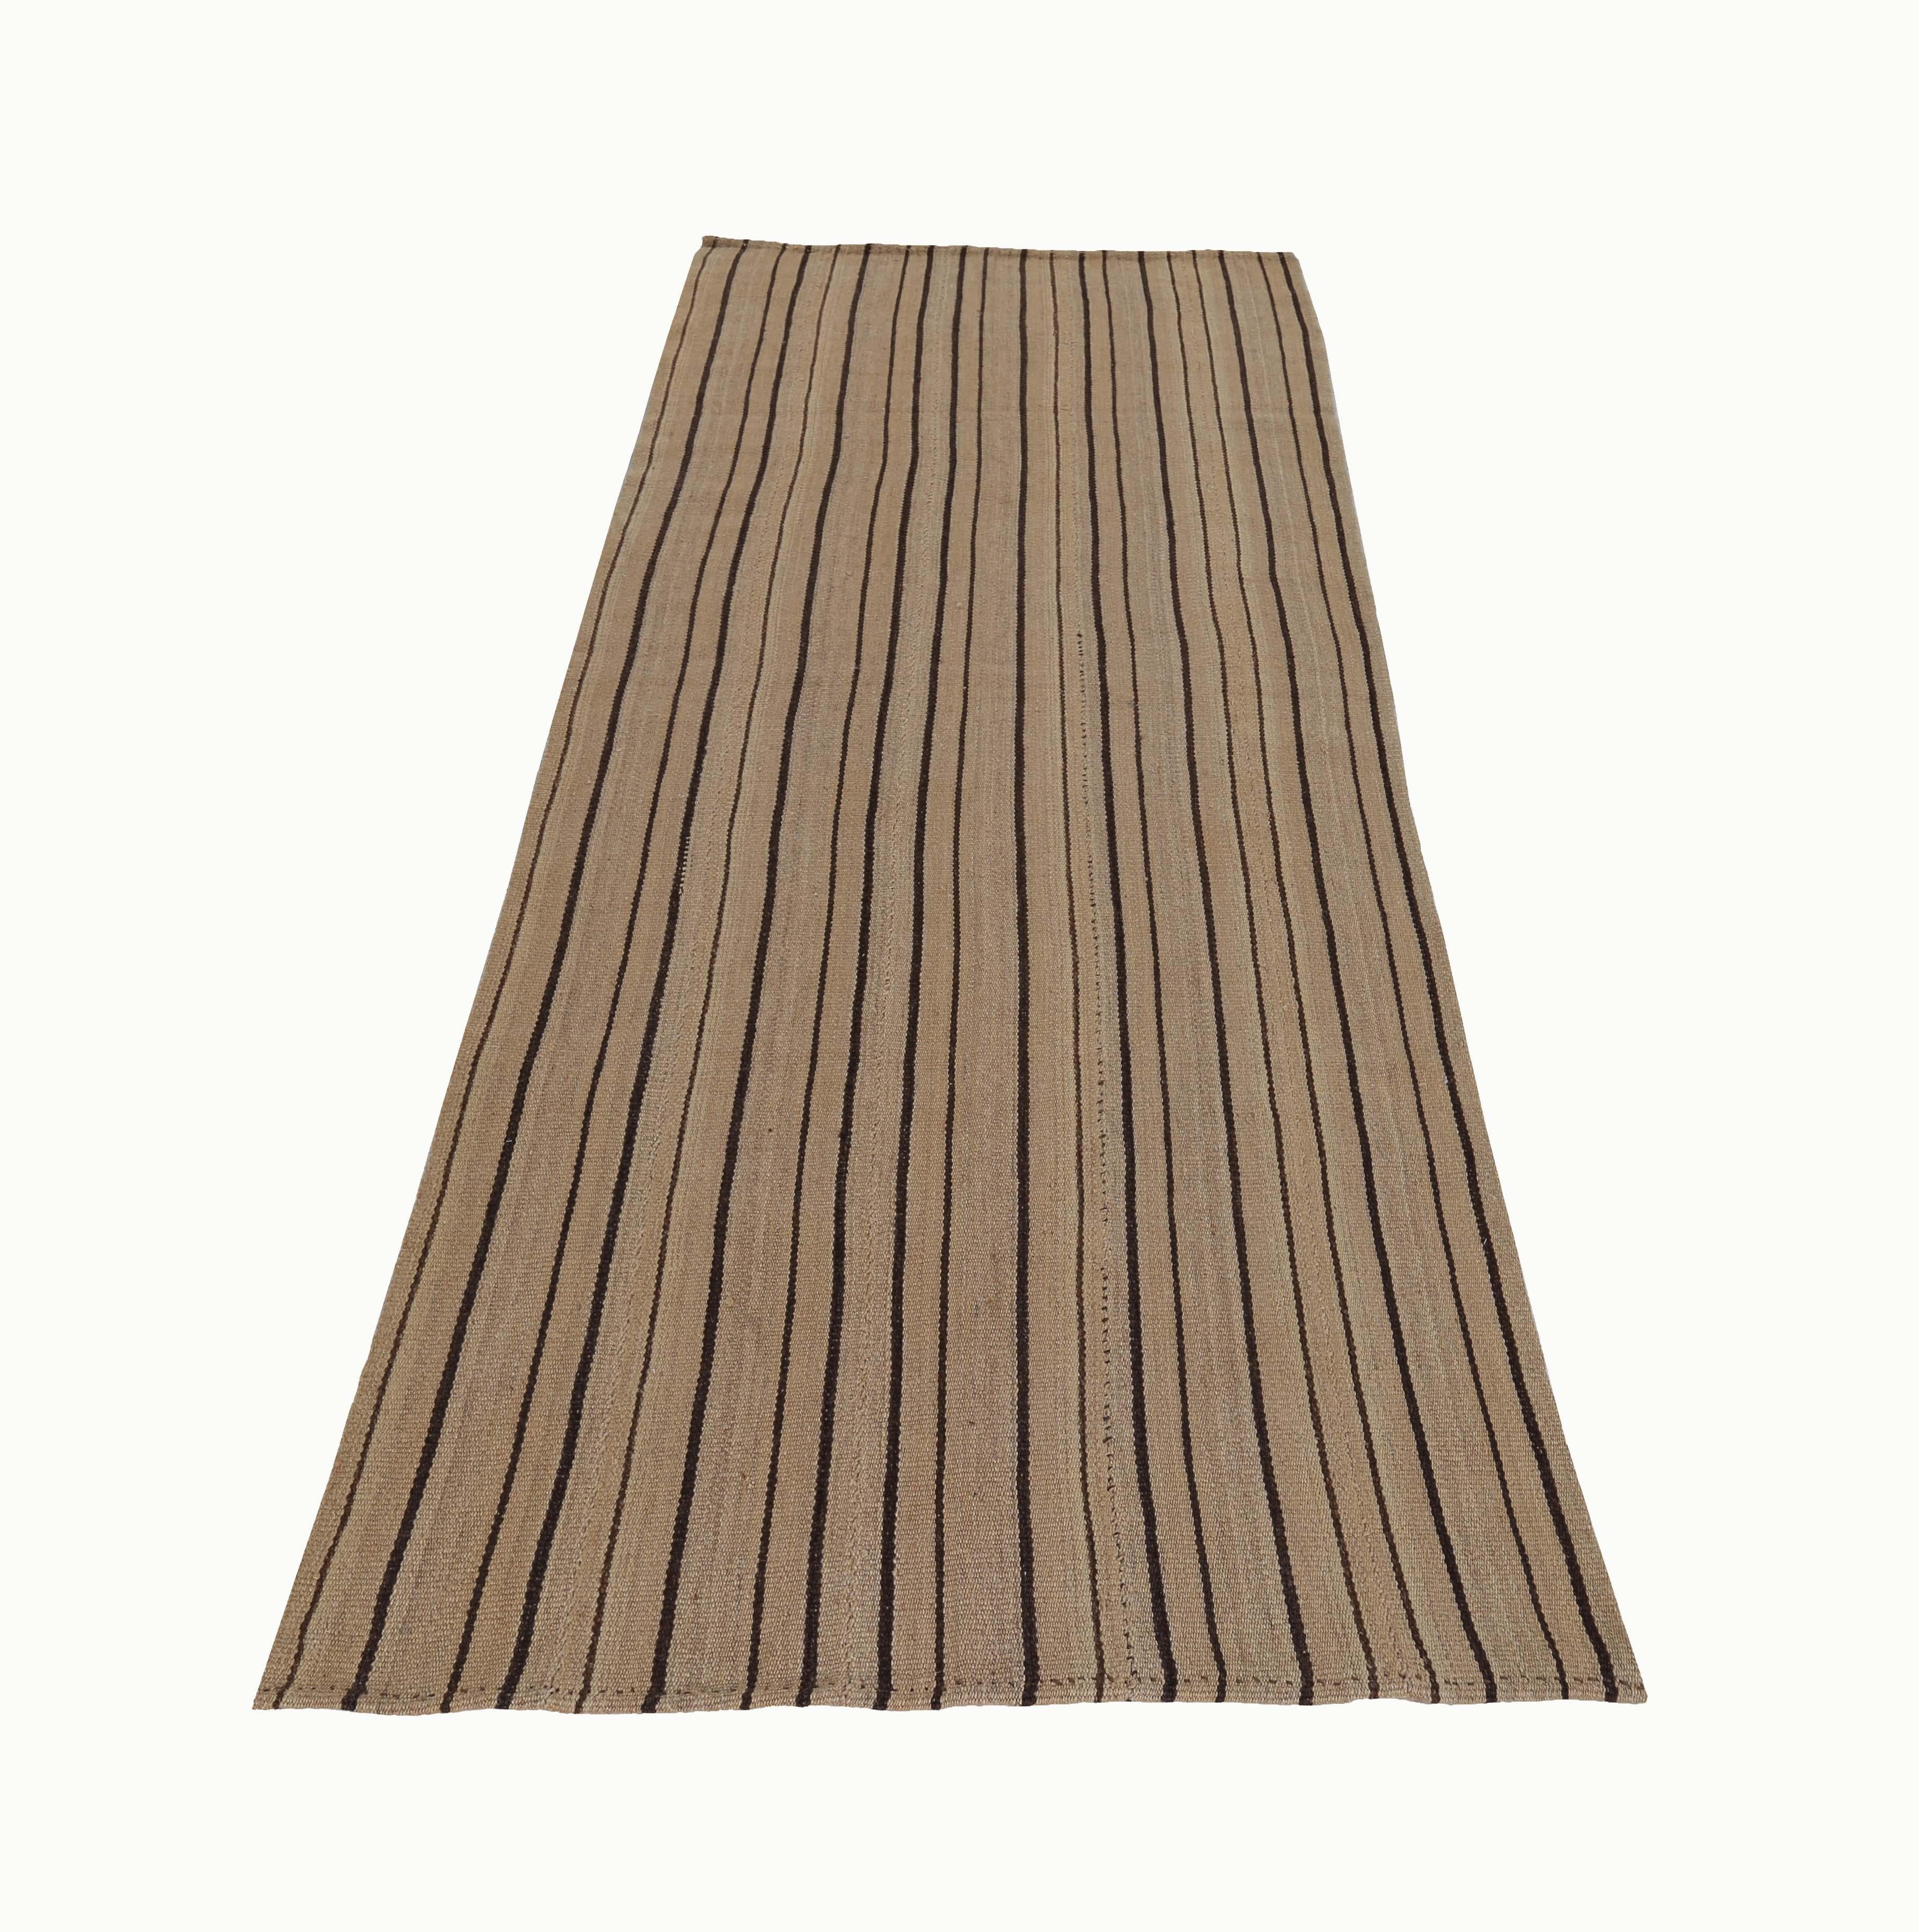 Turkish rug handwoven from the finest sheep’s wool and colored with all-natural vegetable dyes that are safe for humans and pets. It’s a traditional Kilim flat-weave design featuring black pencil stripes on a beige field. It’s a stunning piece to